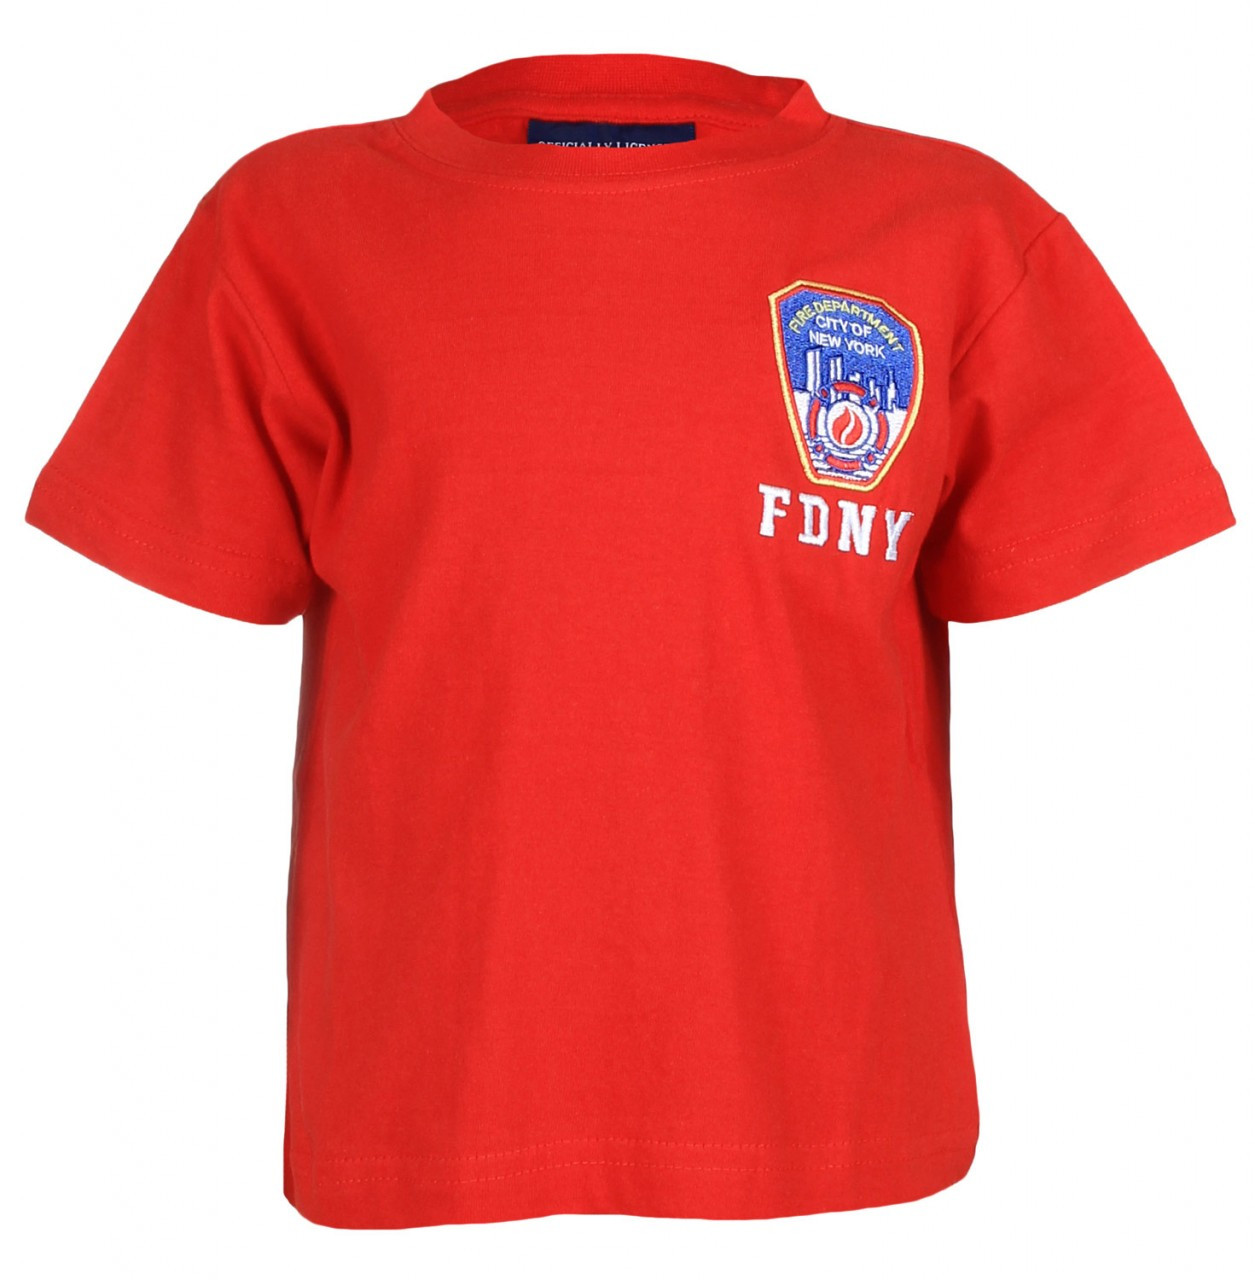 FDNY Patches Tshirts Decals